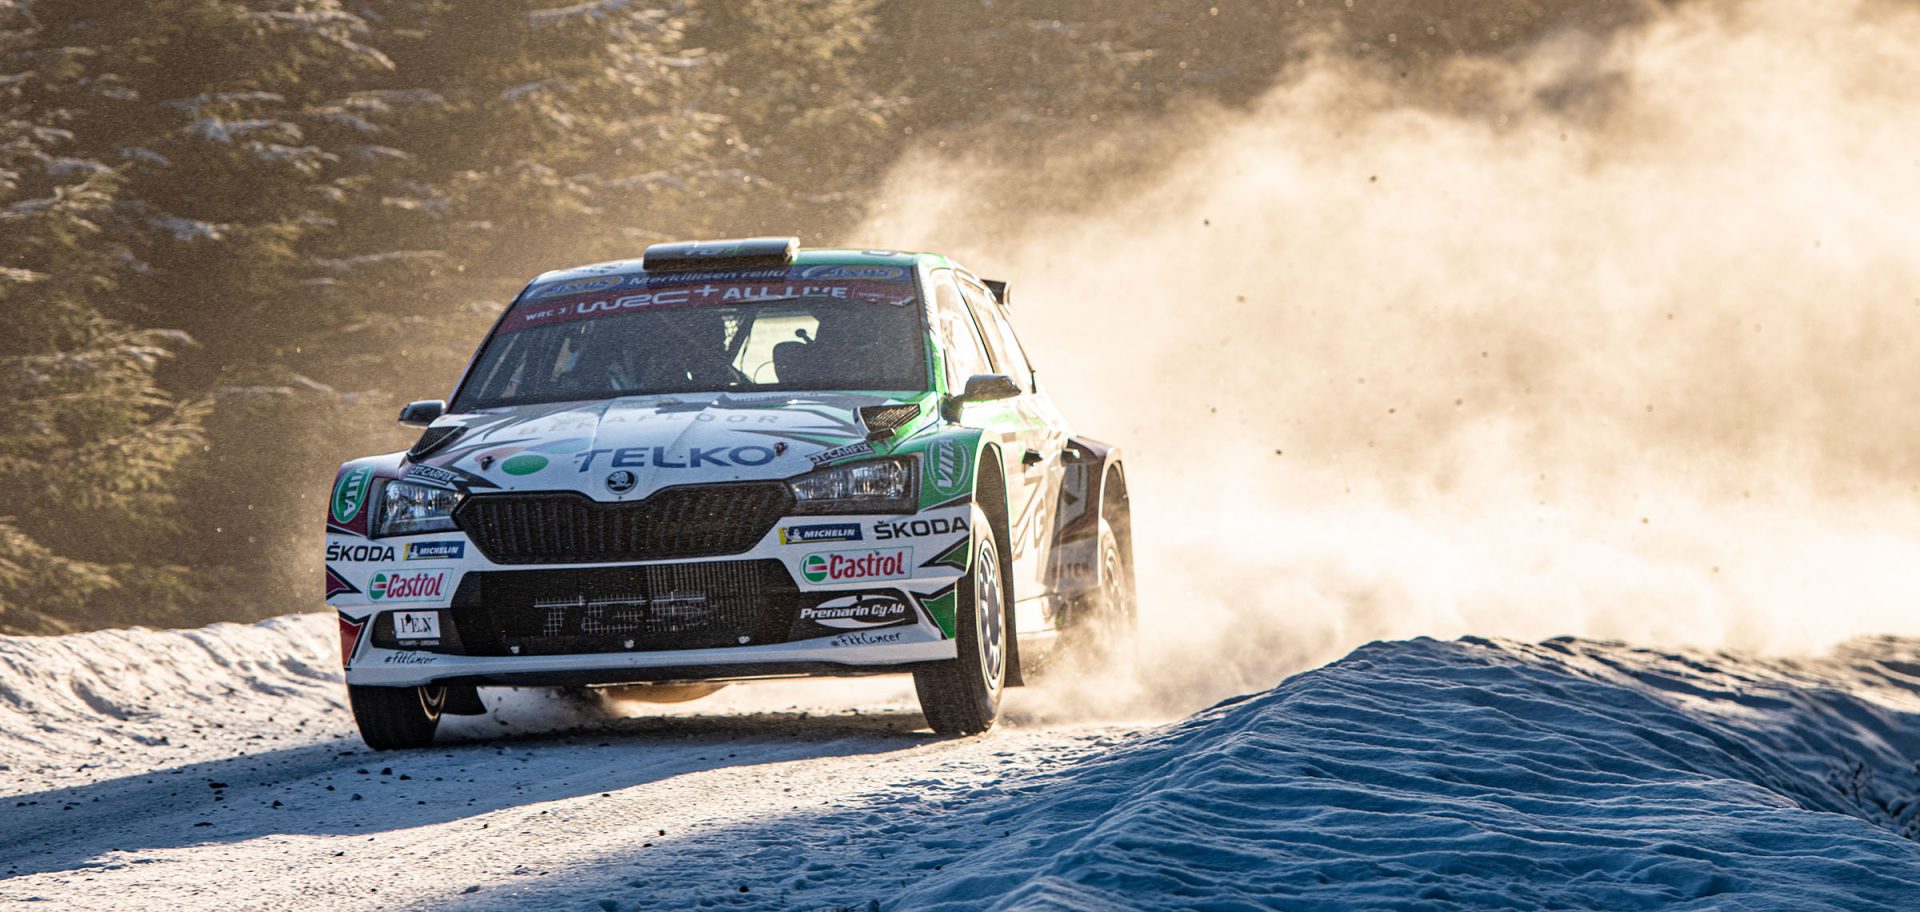 Download wallpapers from the rally sweden to your phone